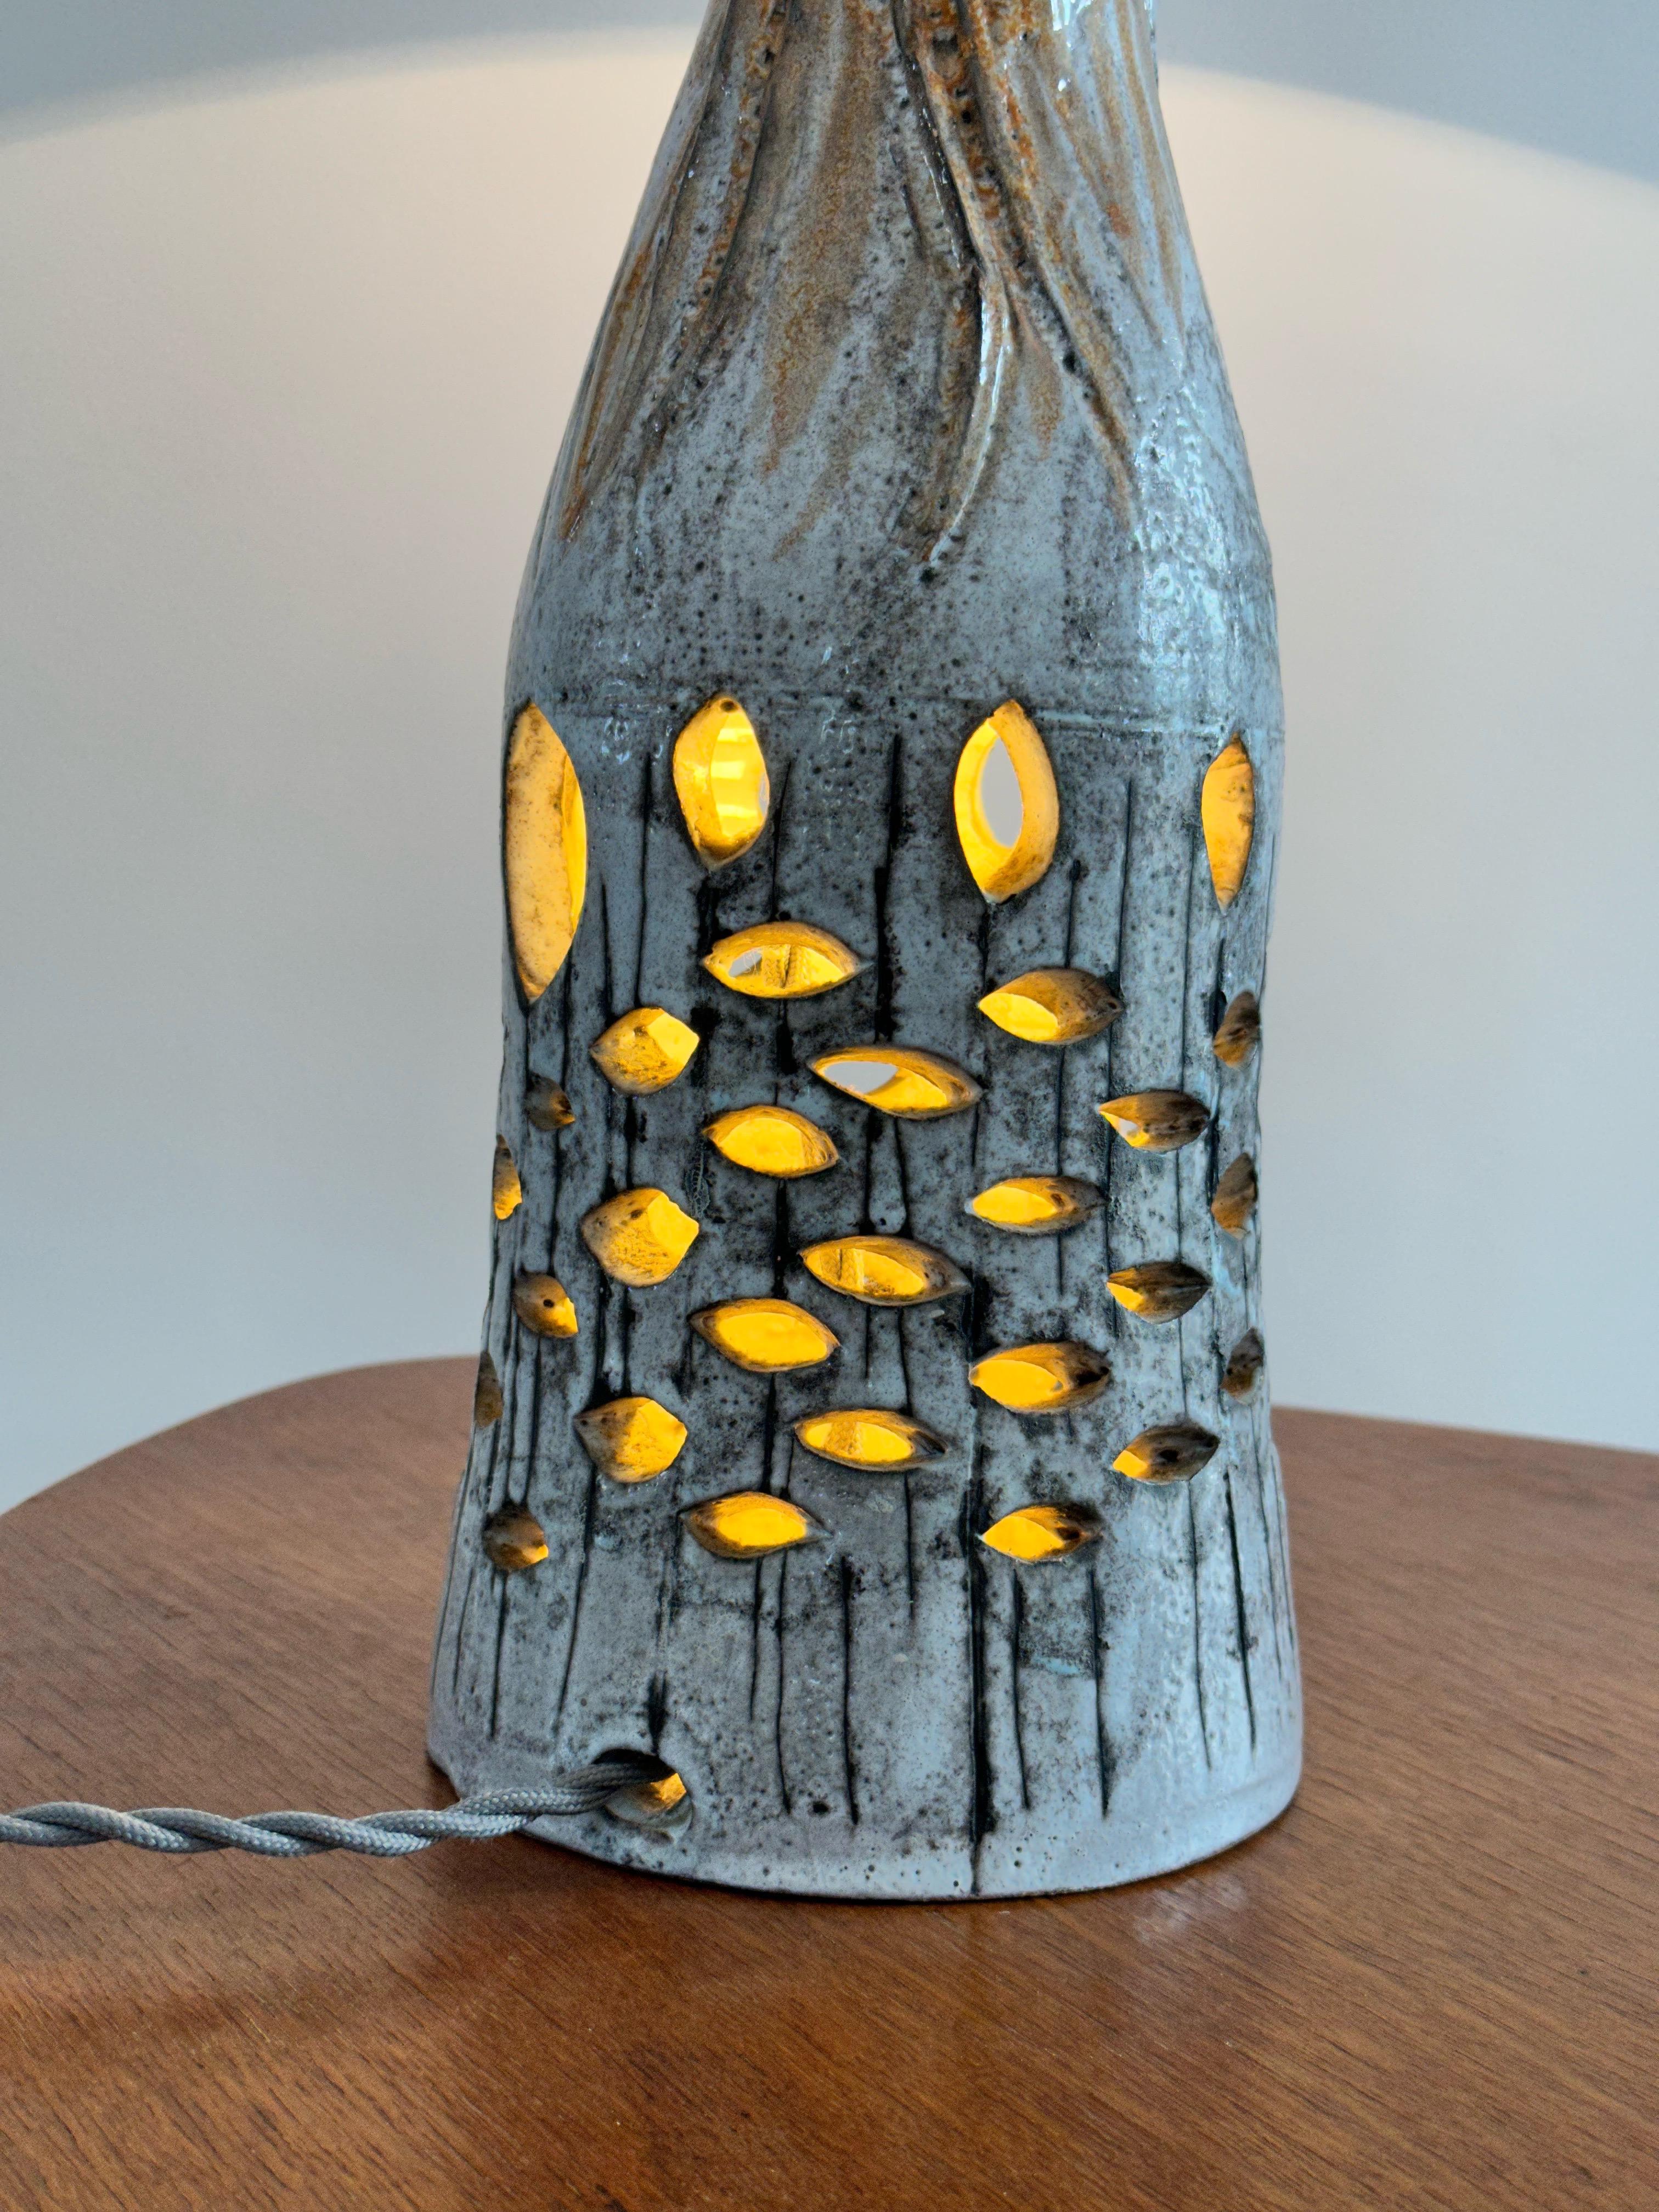 Anthropomorphic Ceramic Lamp Maurice Camos, French Artist, Unique Work, 1960s For Sale 1